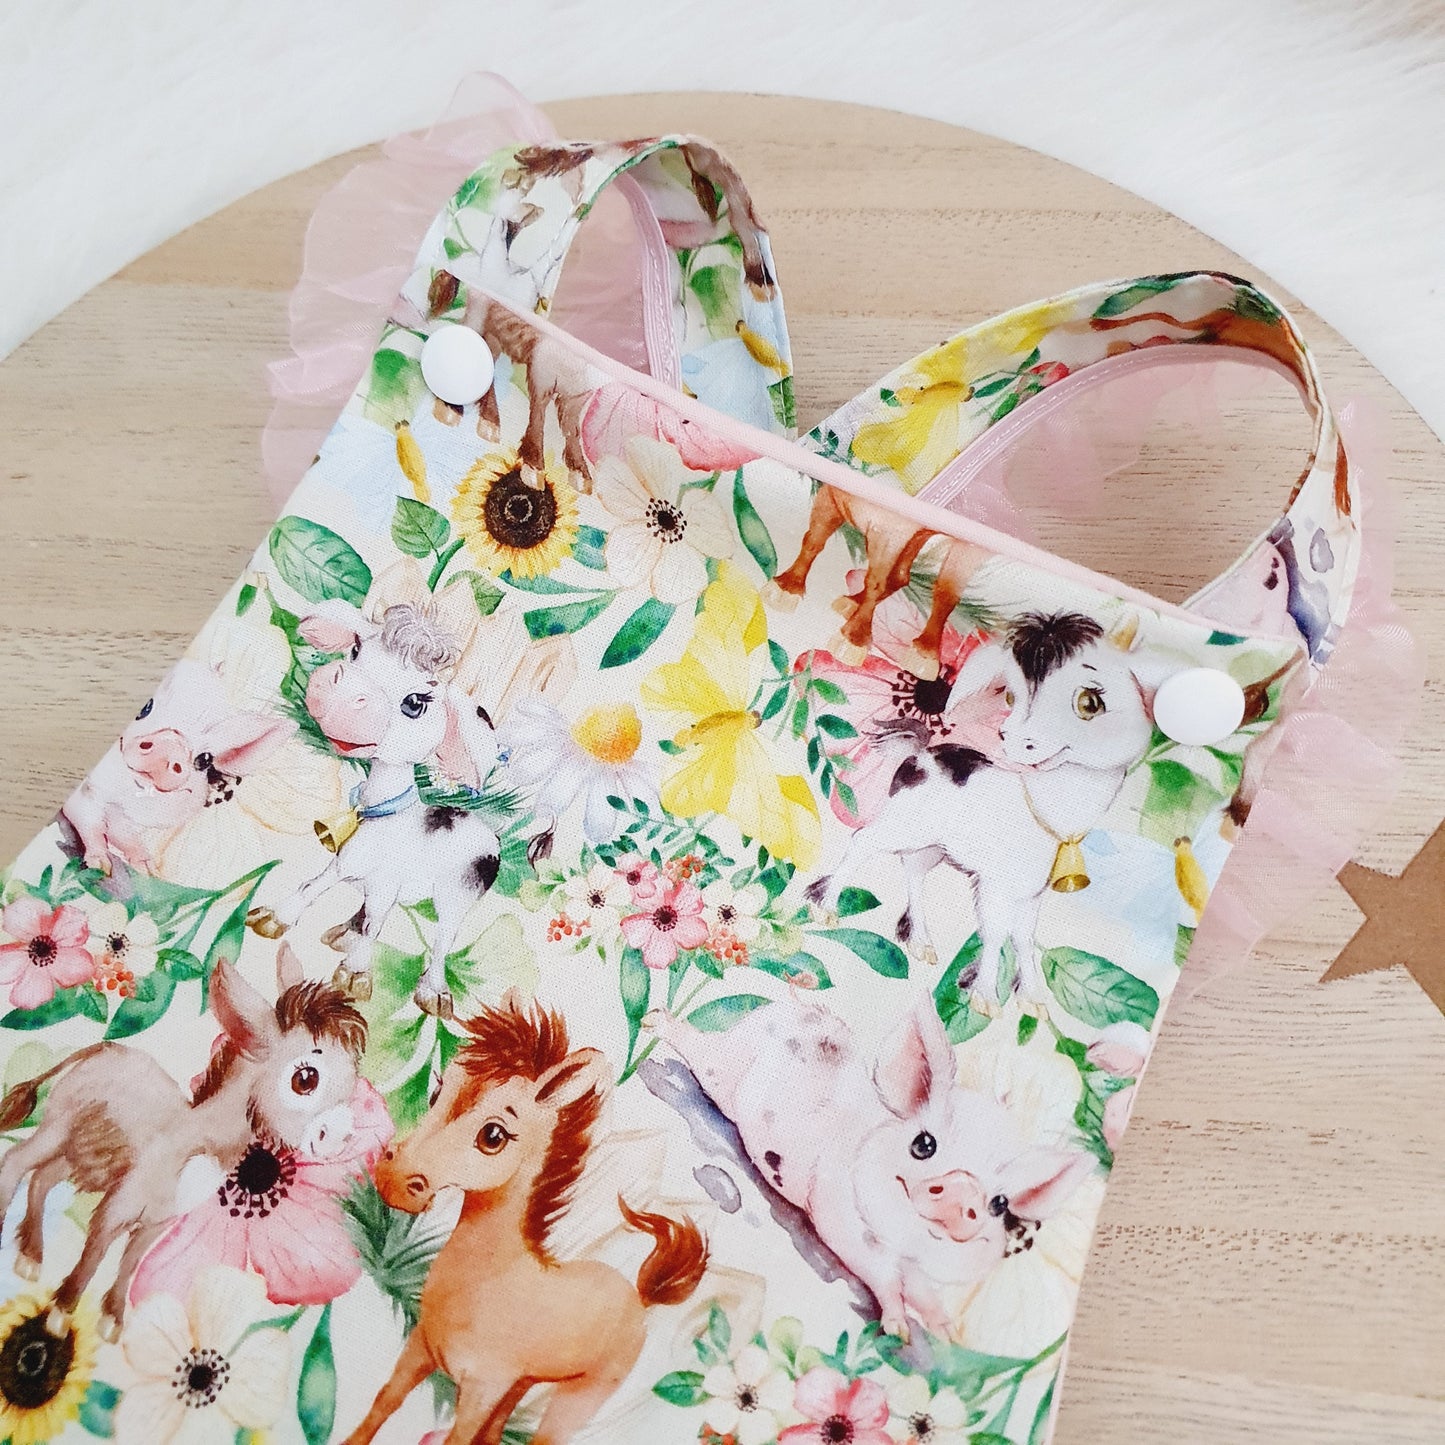 FARM ANIMALS Baby Romper with trim, Handmade Baby Clothing, Size 1 - 1st Birthday Clothing / Cake Smash Outfit, 12 - 18 months